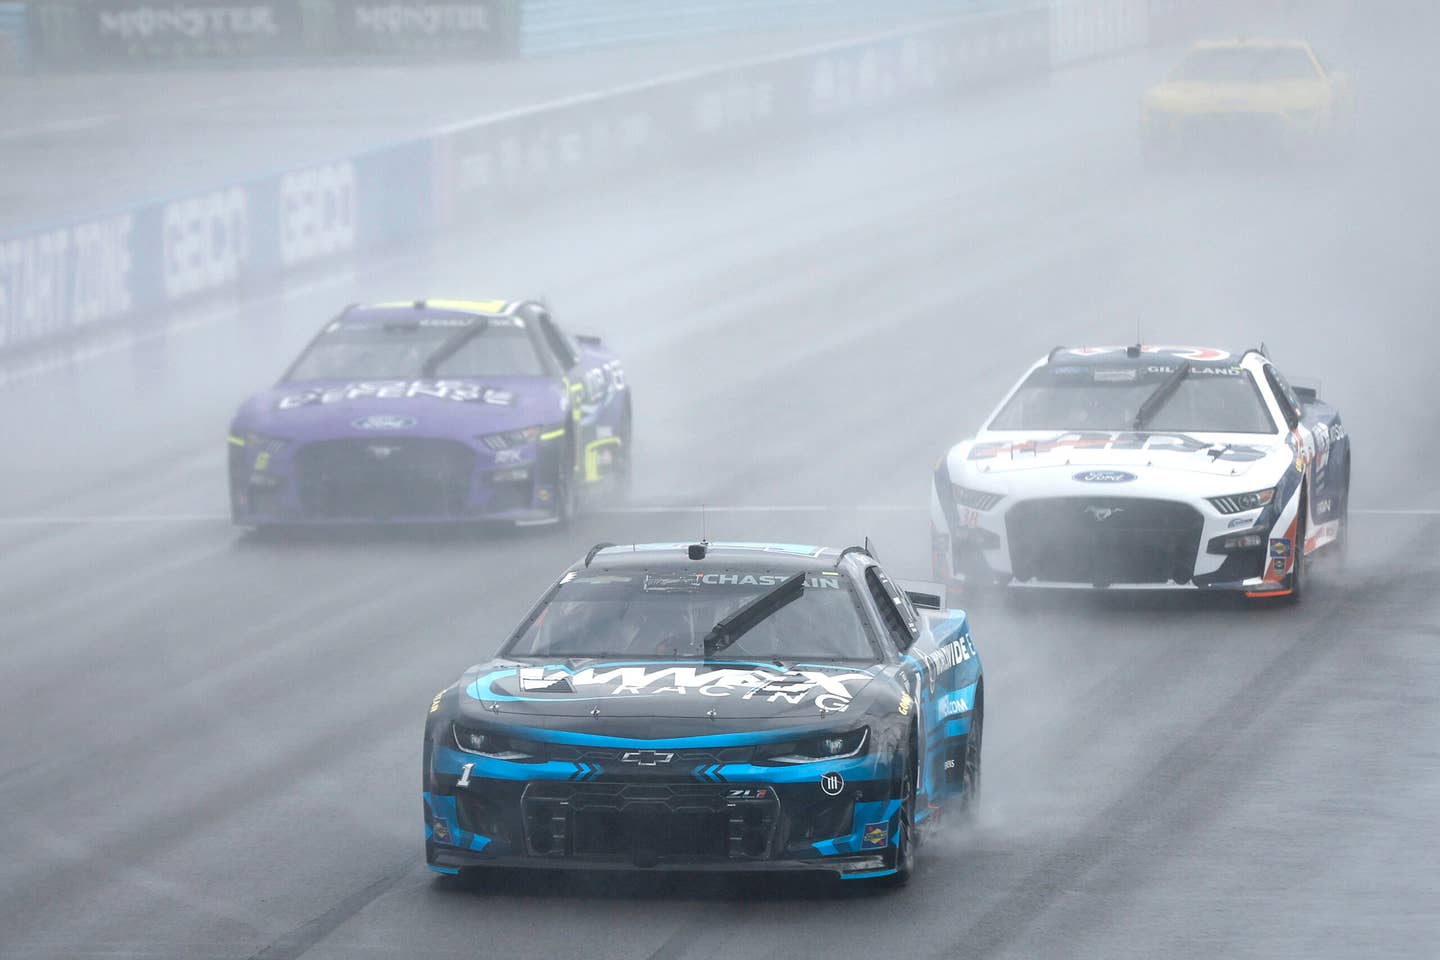 NASCAR Will Finally Race in the Rain With New Wet Weather Kit for Short Ovals